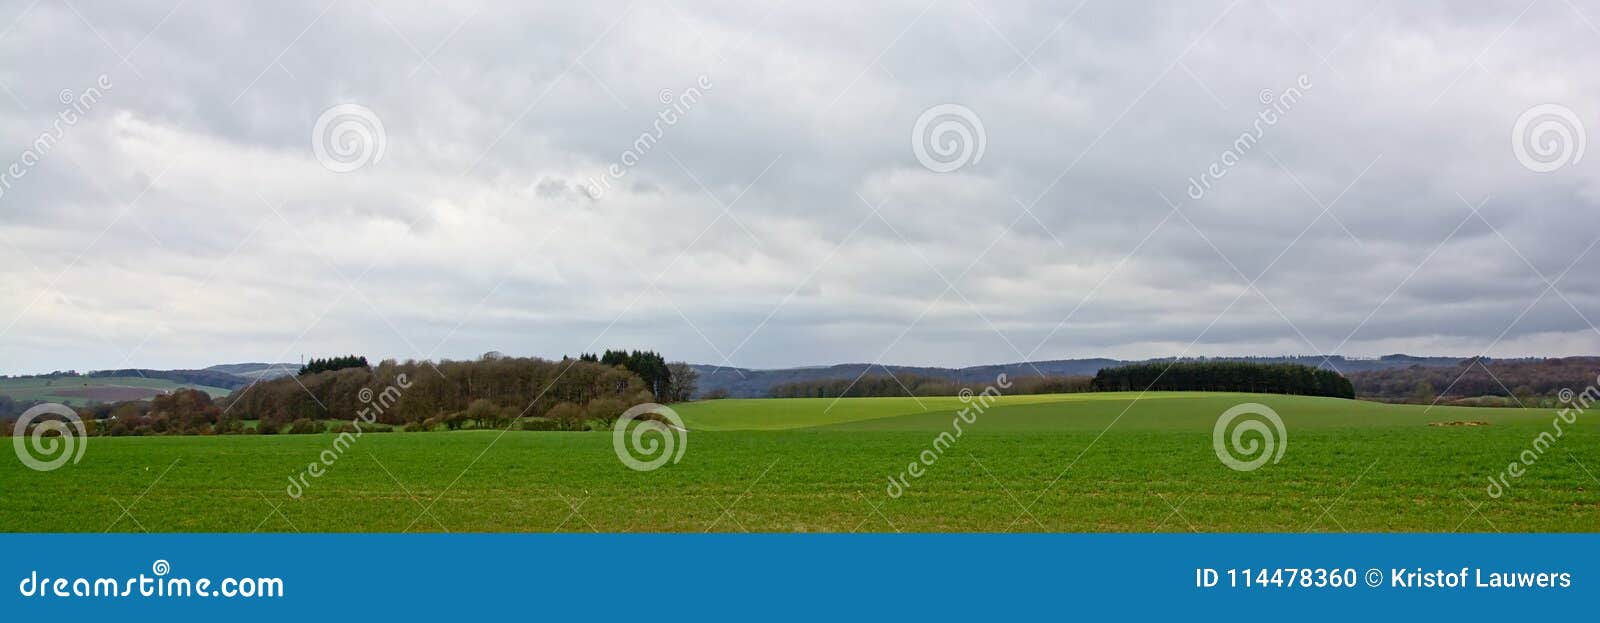 Panoramic Ardennes Landscape, Lush Green Fields, with Hills and Forests ...